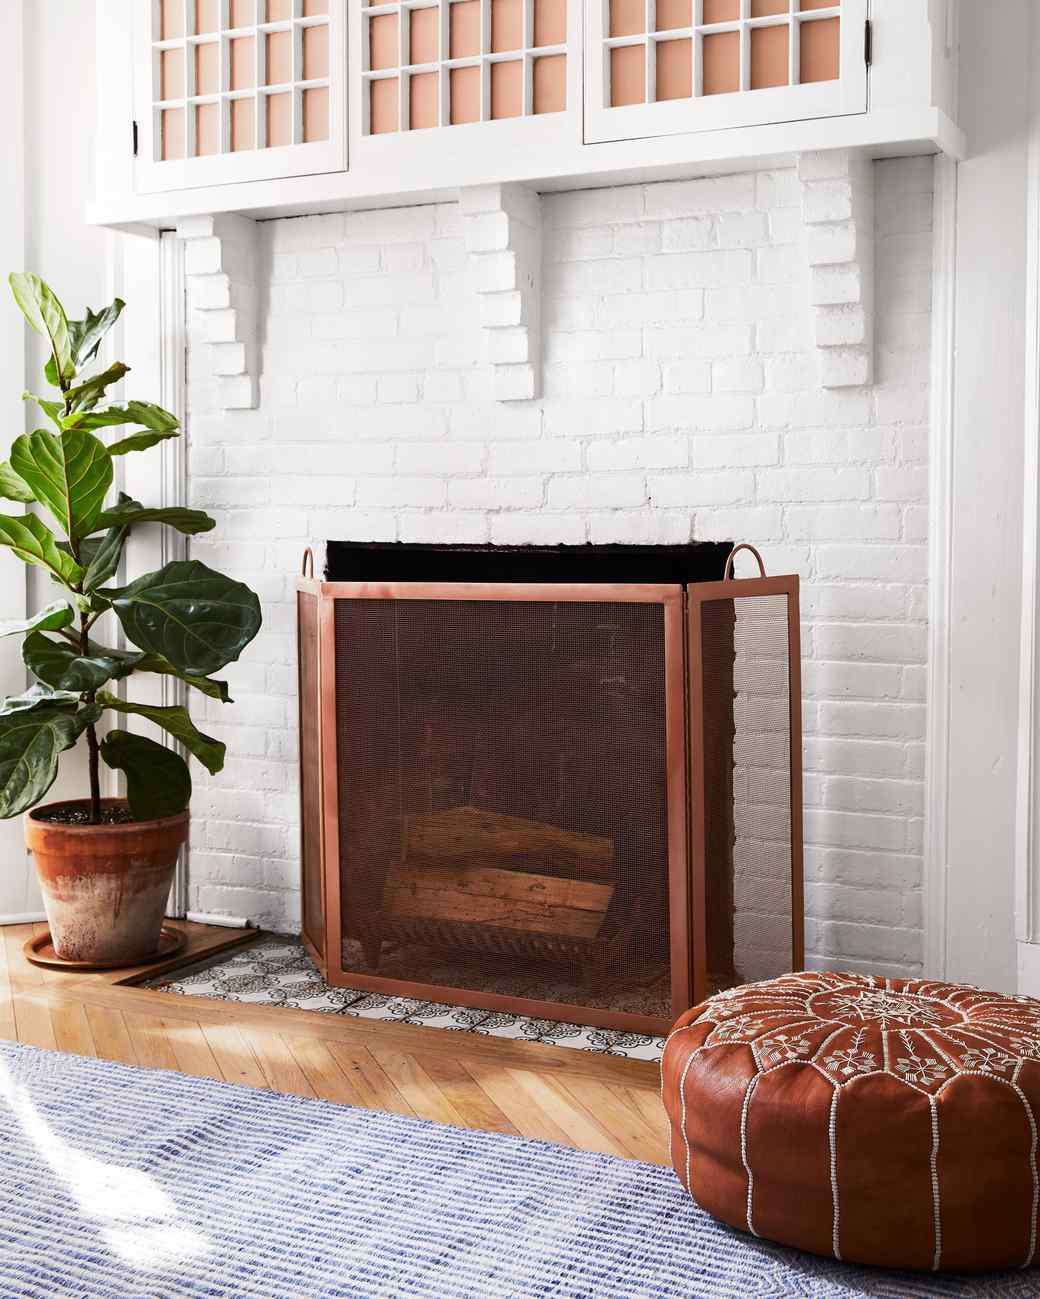 Spray Painted Metal Fire Screen, Can I Spray Paint My Brick Fireplace